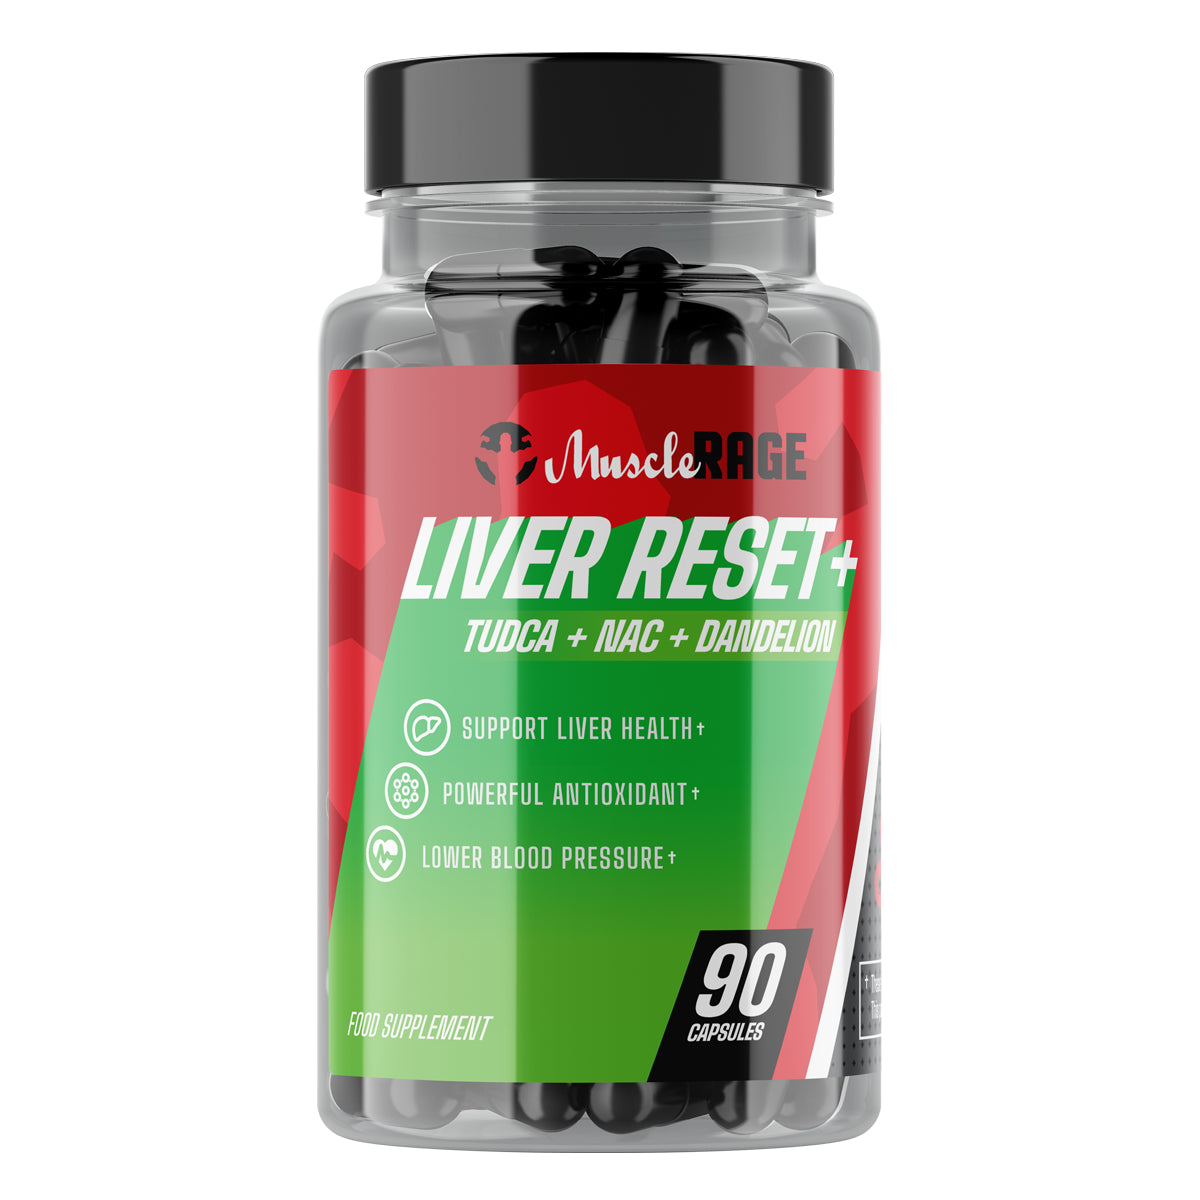 Liver reset Muscle rage